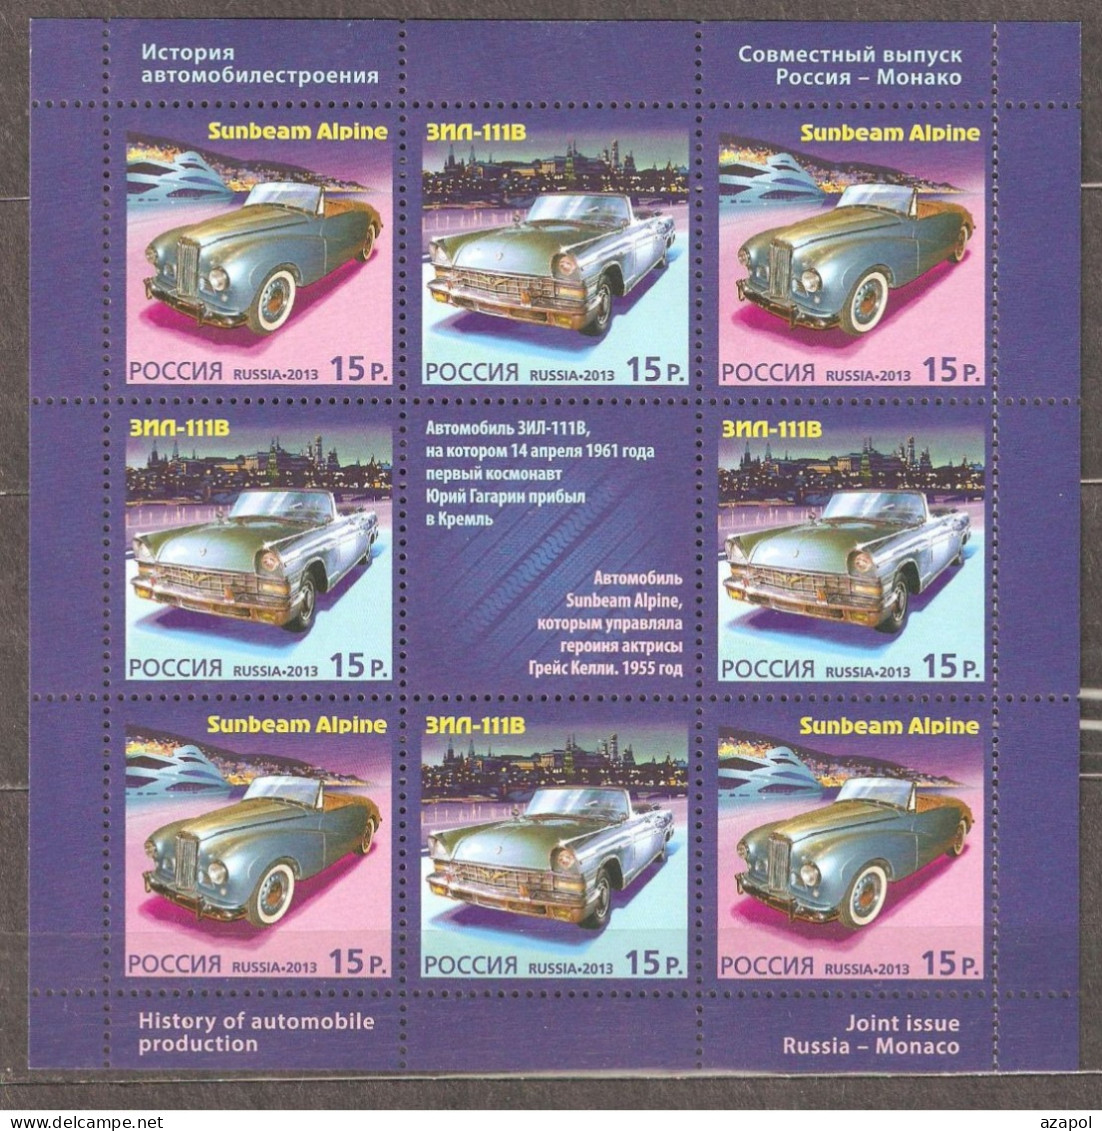 Russia: Mint Sheet, Historical Cars - Join Issue With Monaco, 2013, Mi#2000-1, MNH - Emissions Communes